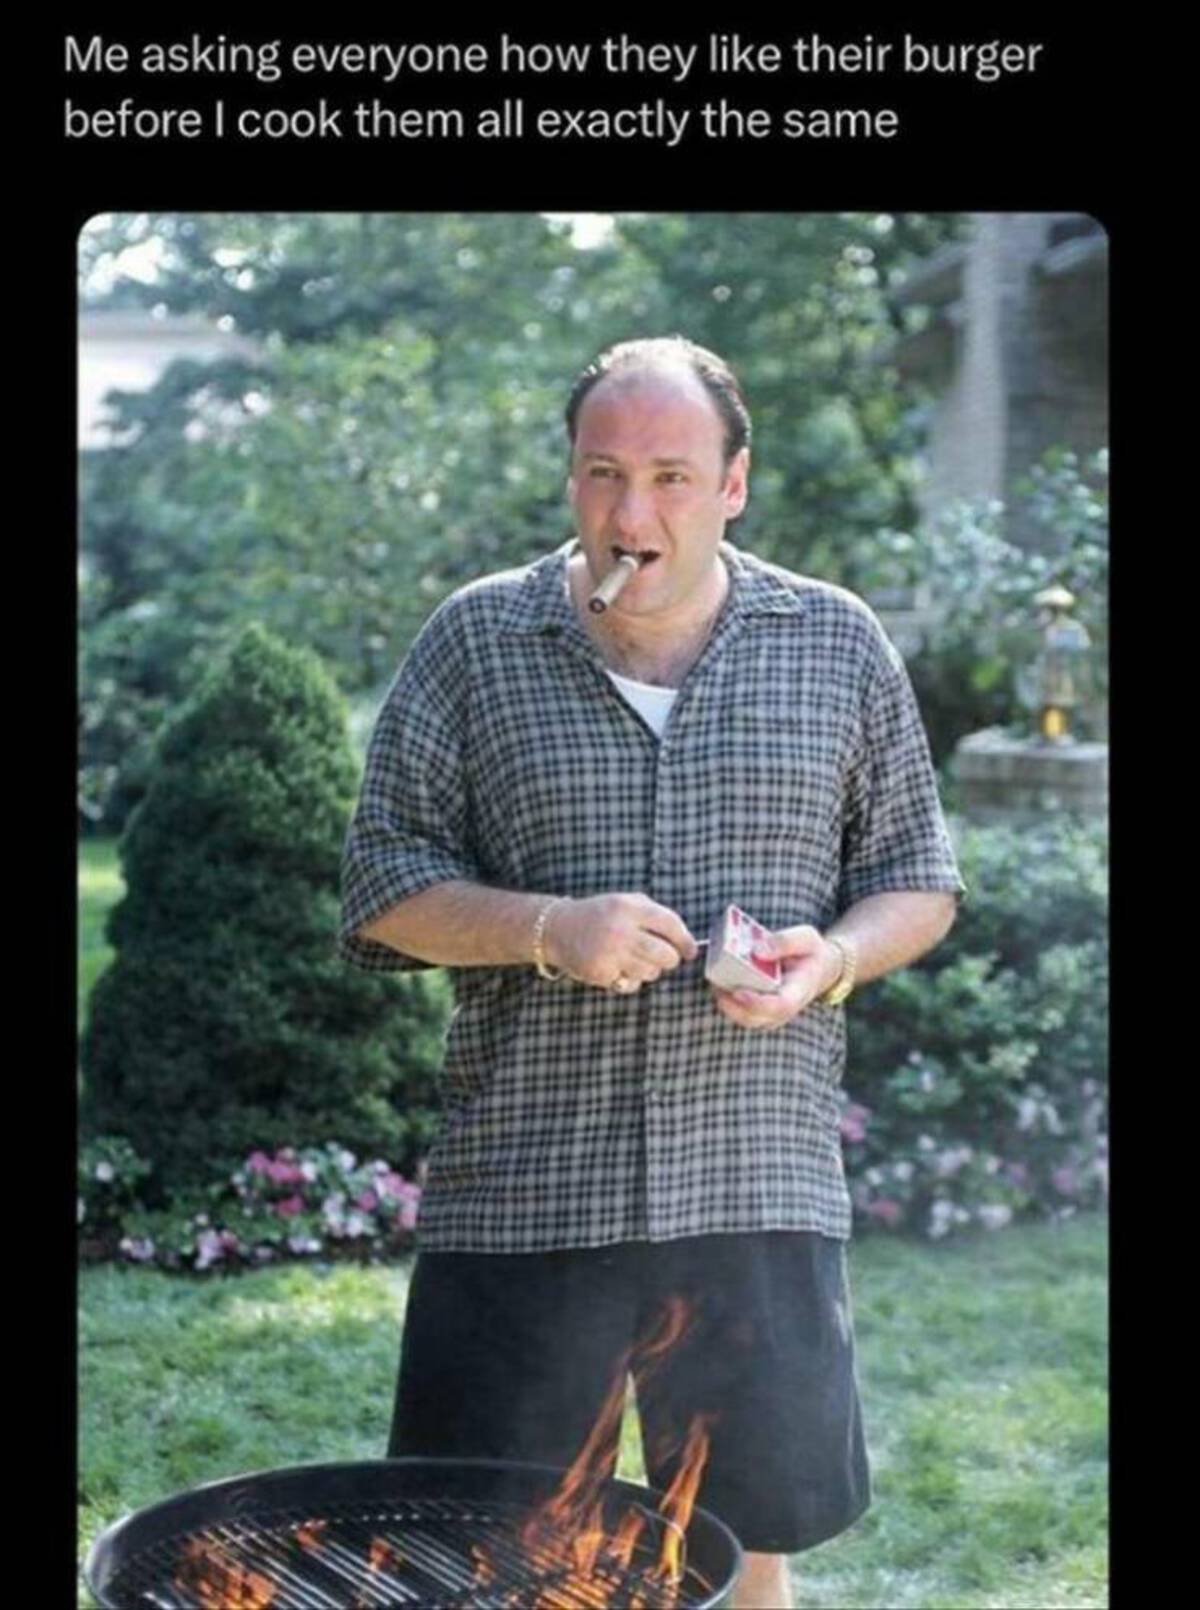 tony soprano bbq - Me asking everyone how they their burger before I cook them all exactly the same